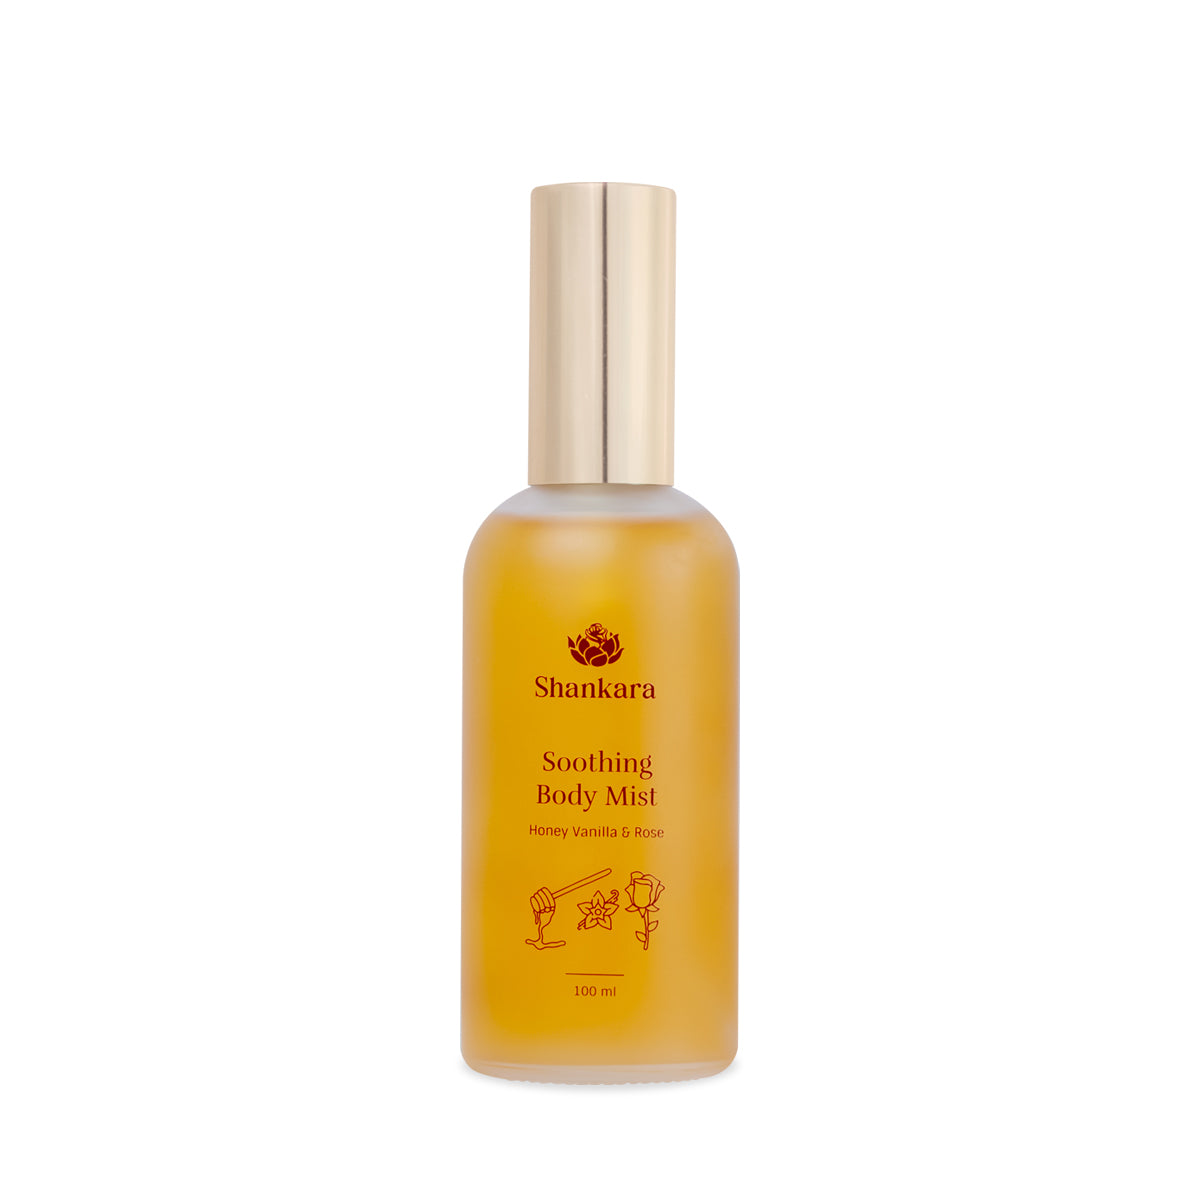 Soothing Body Mist